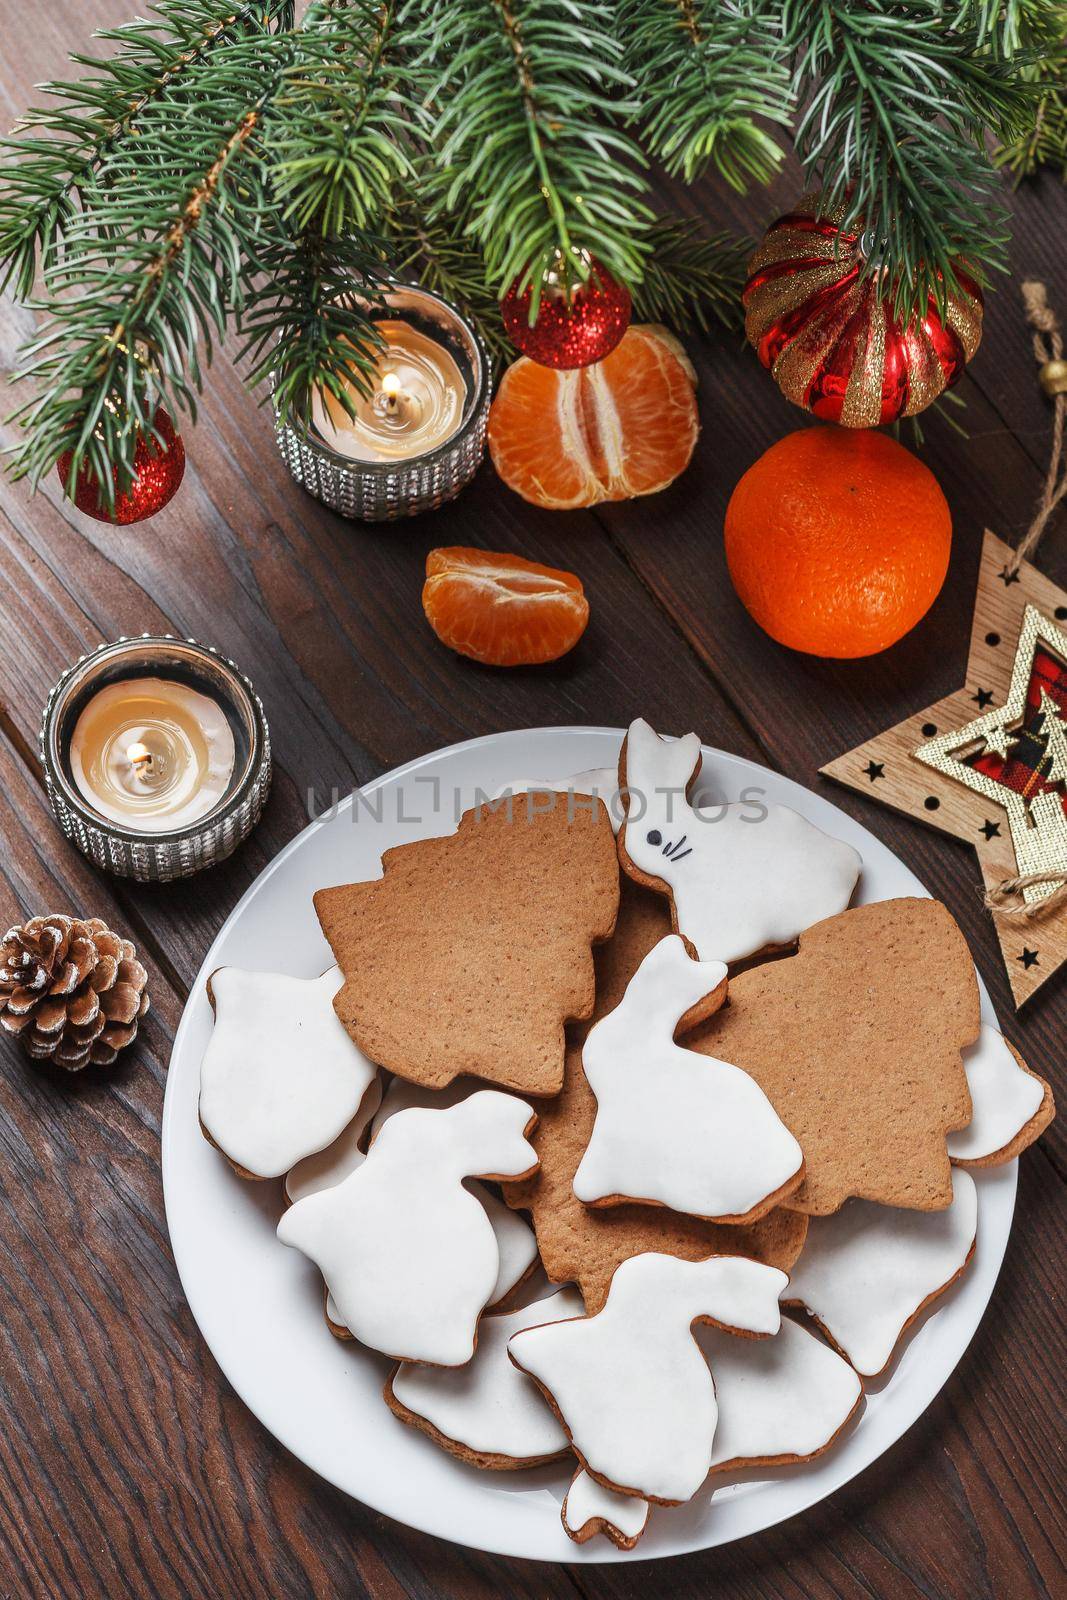 Delicious homemade Christmas cookies in the form of a rabbit and a Christmas tree on a wooden table decorated with New Year's decor.